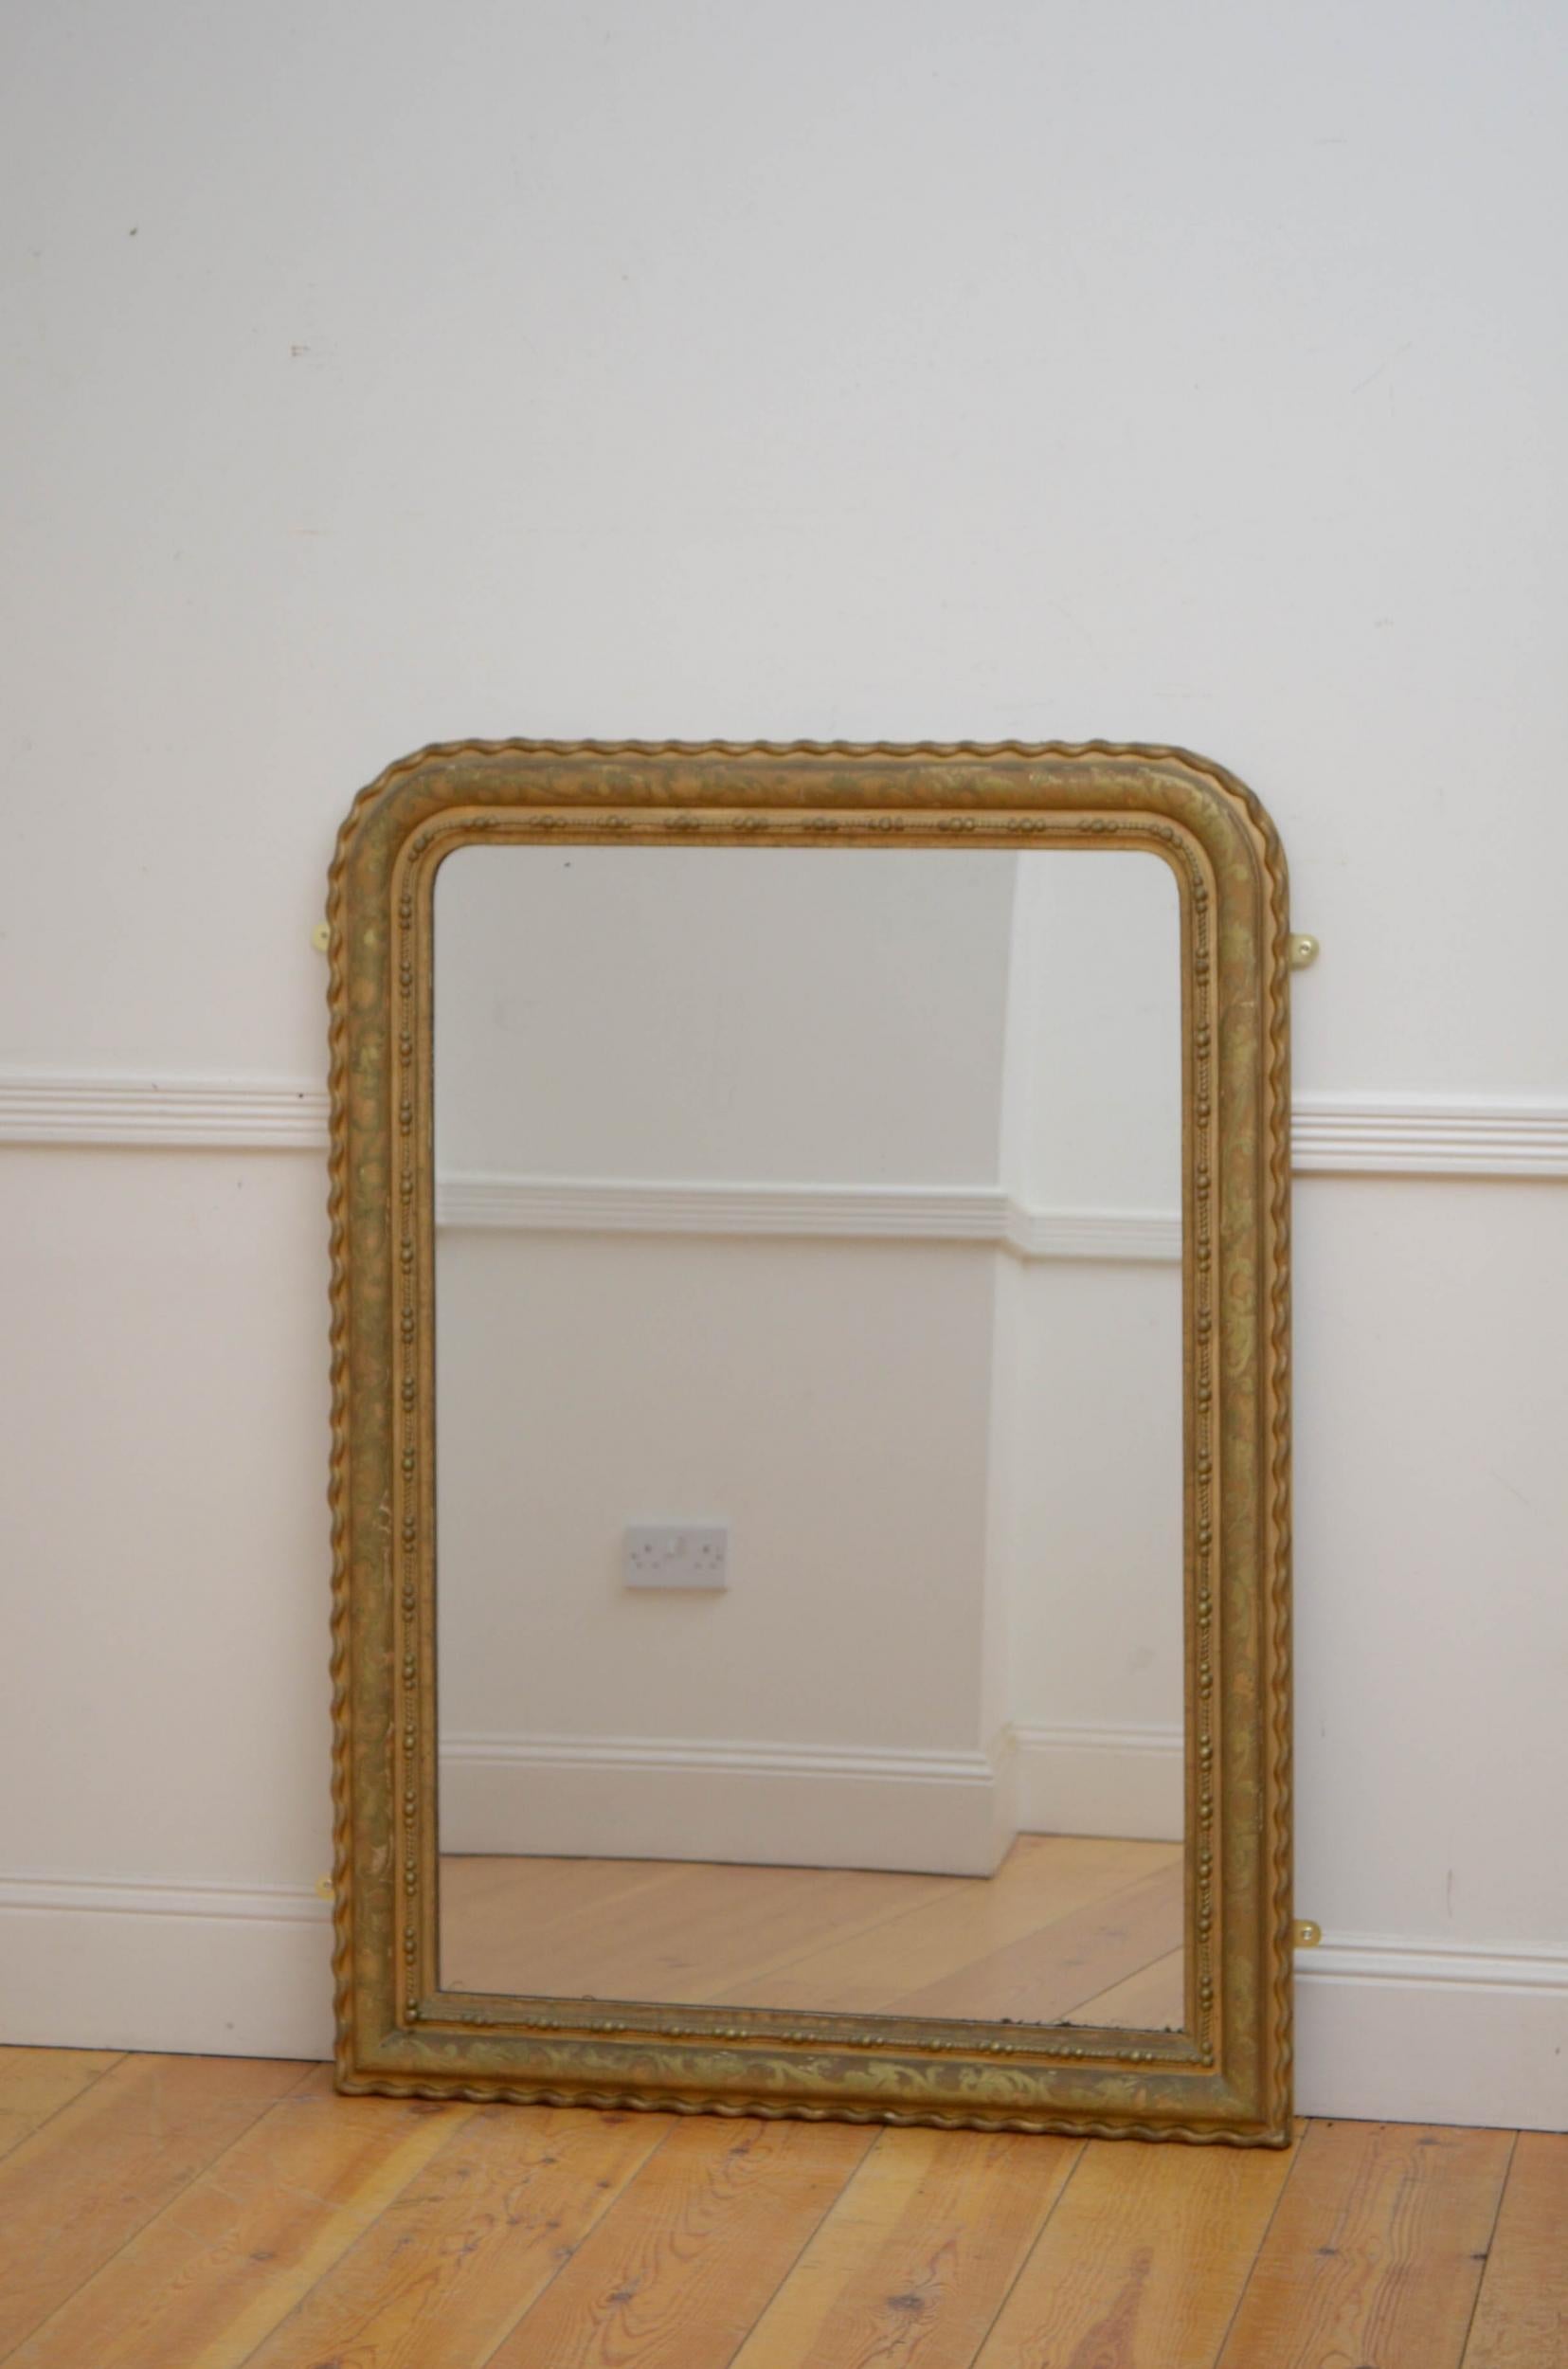 Sn5072 French gilded wall mirror, having original glass with some foxing in moulded frame with foliage decoration and wave border. This antique mirror retains its original glass, gilt with extensive patina and backboards, all in home ready